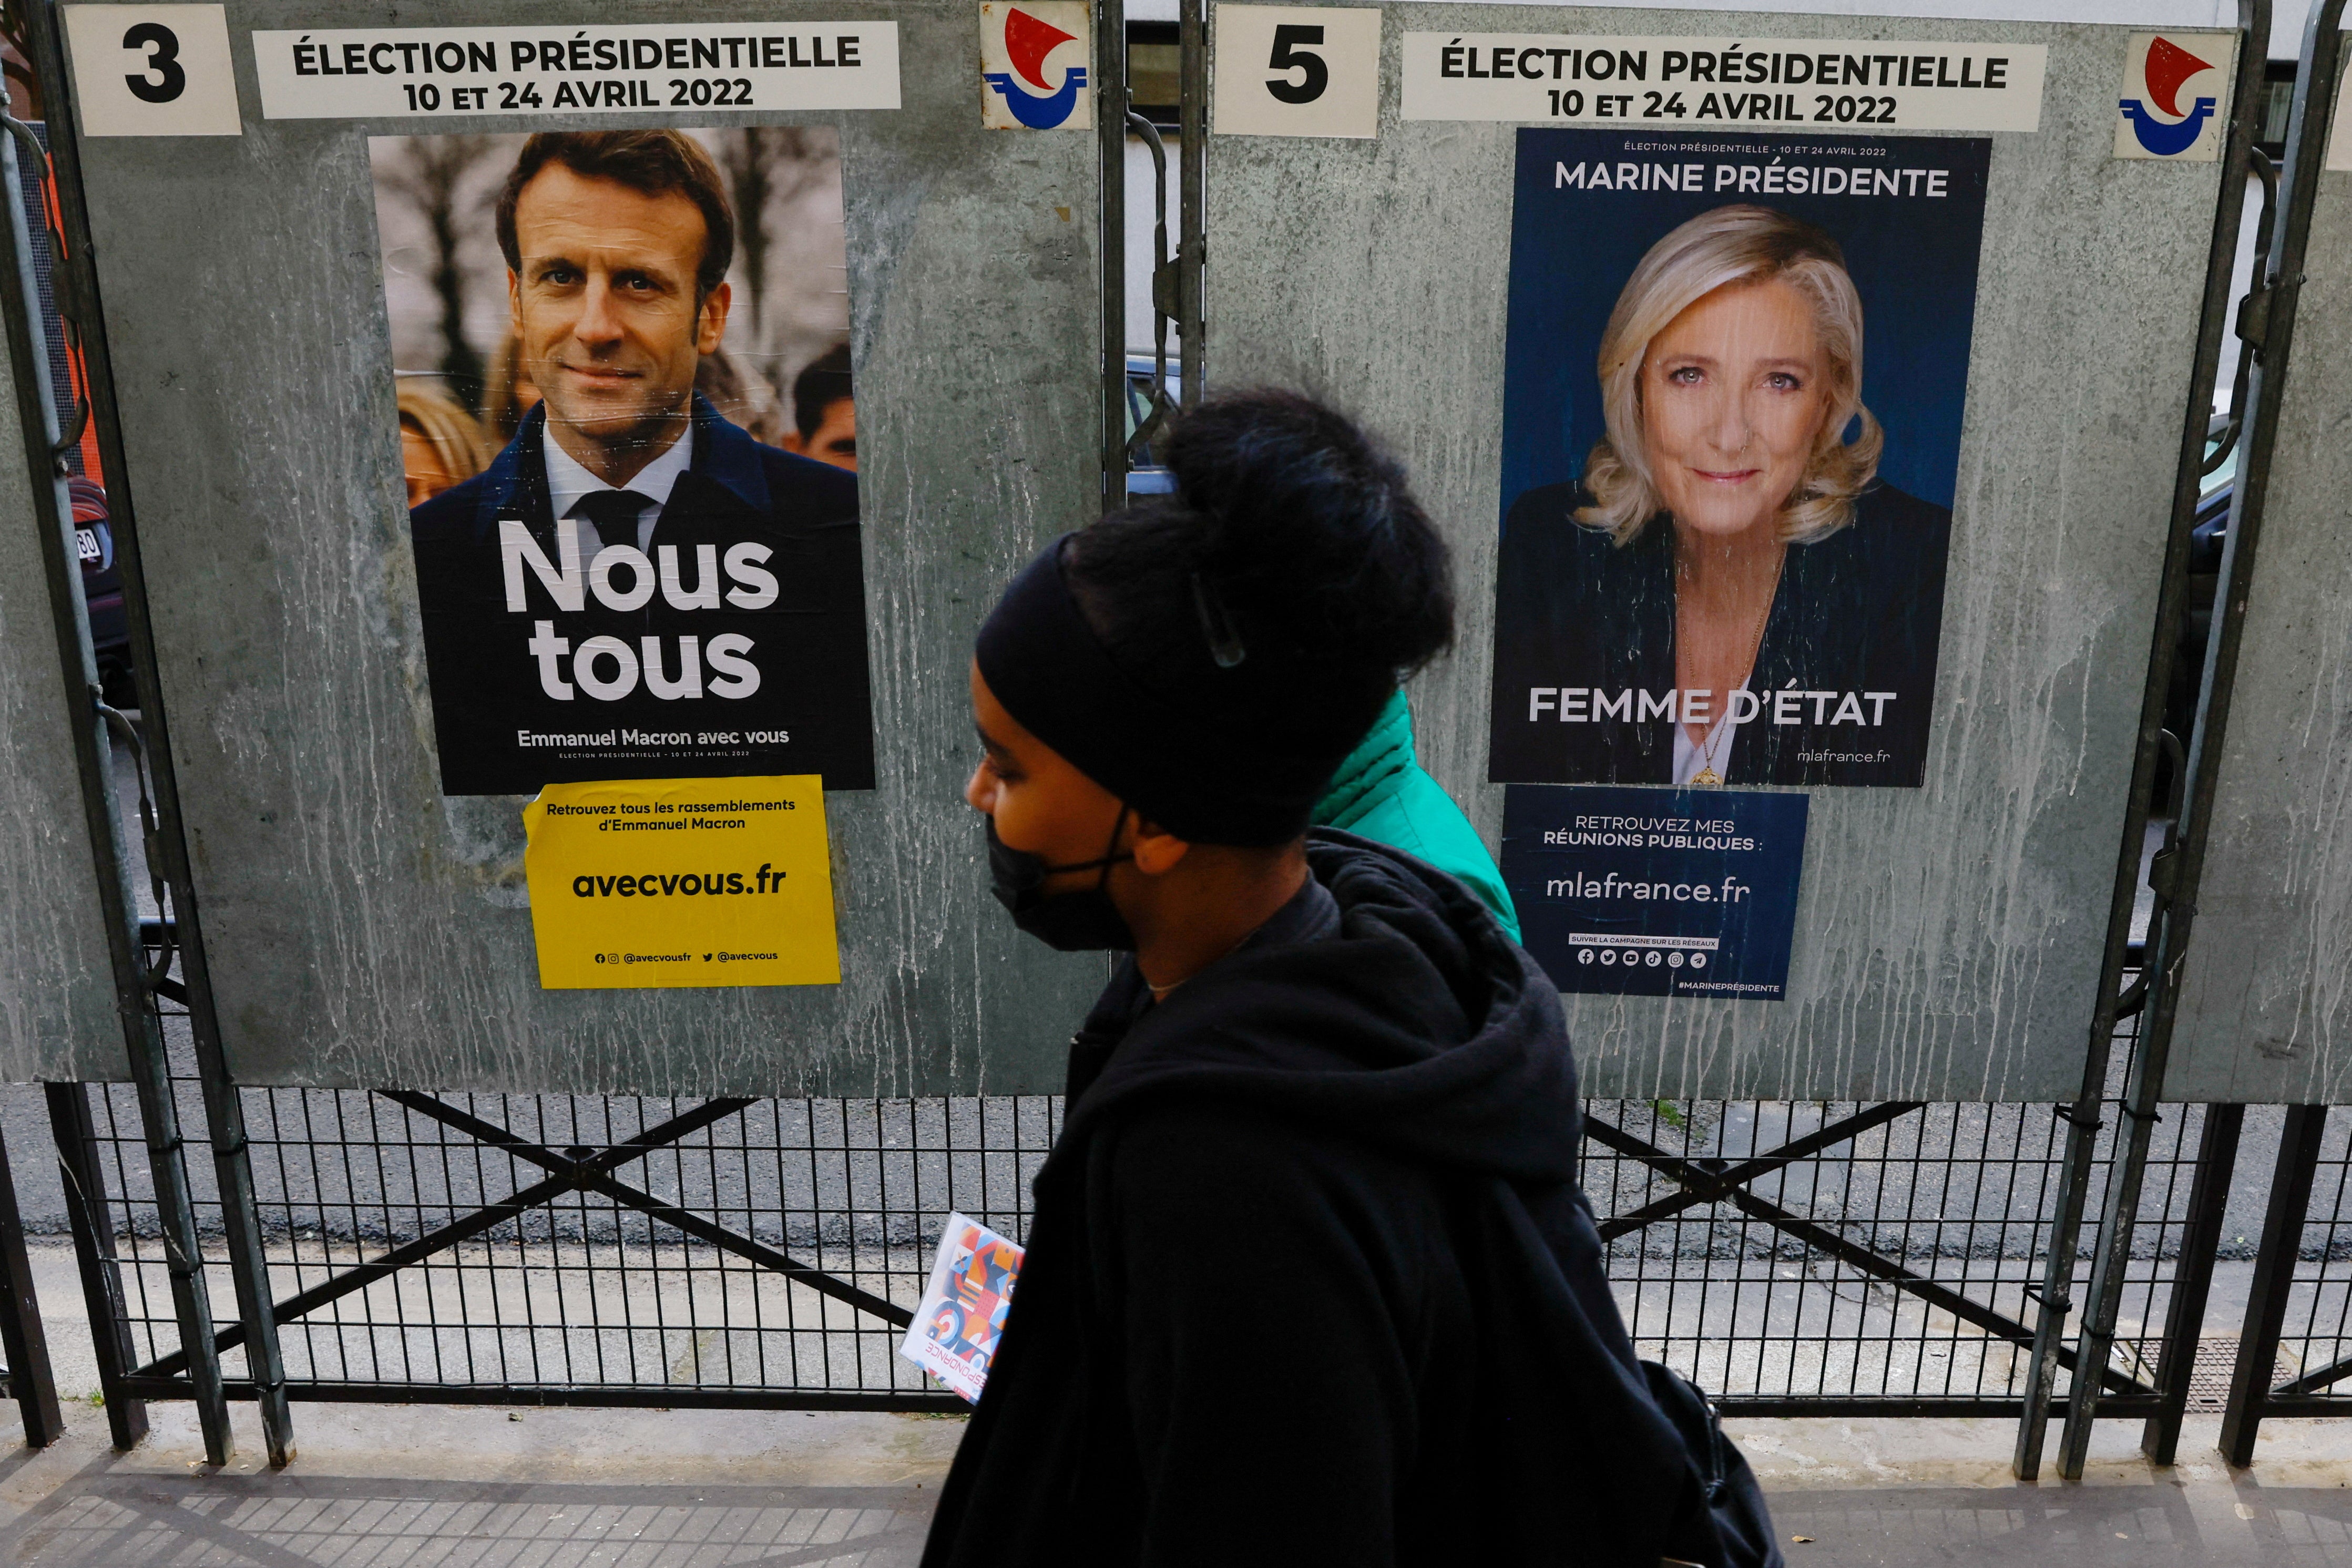 A Le Pen scare could be just what is needed to get Macron’s vote out